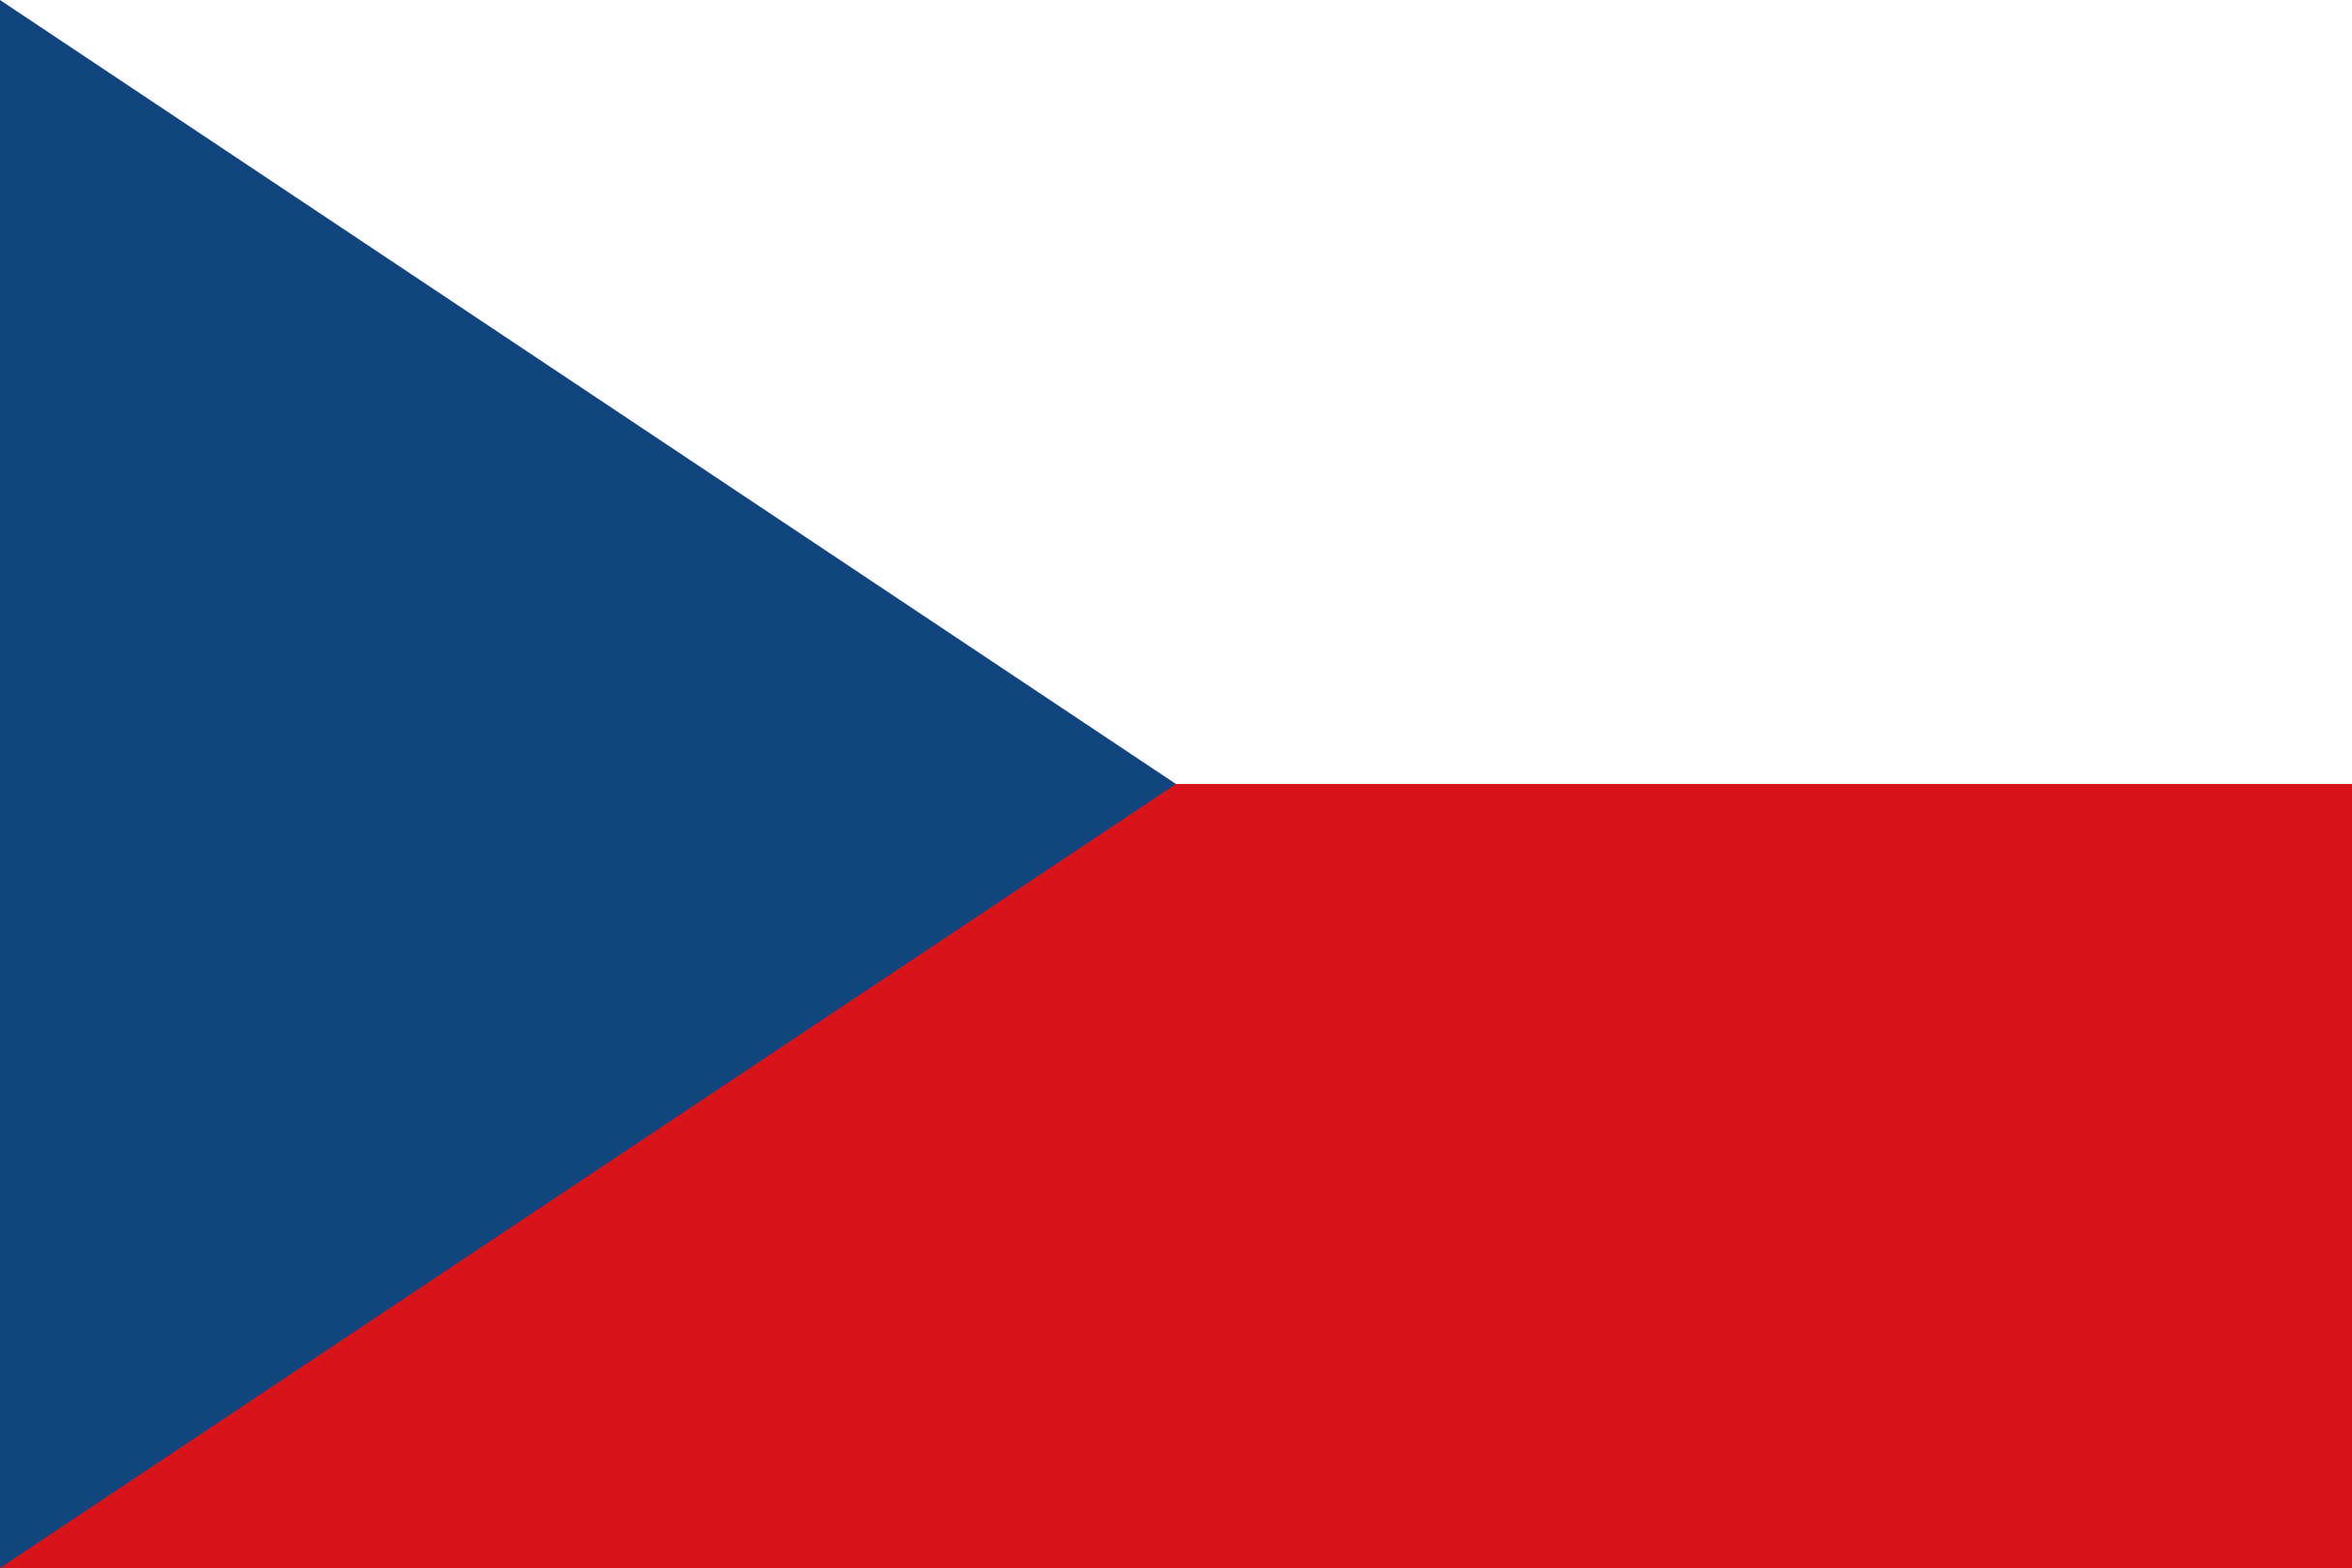 the image shows the czech flag